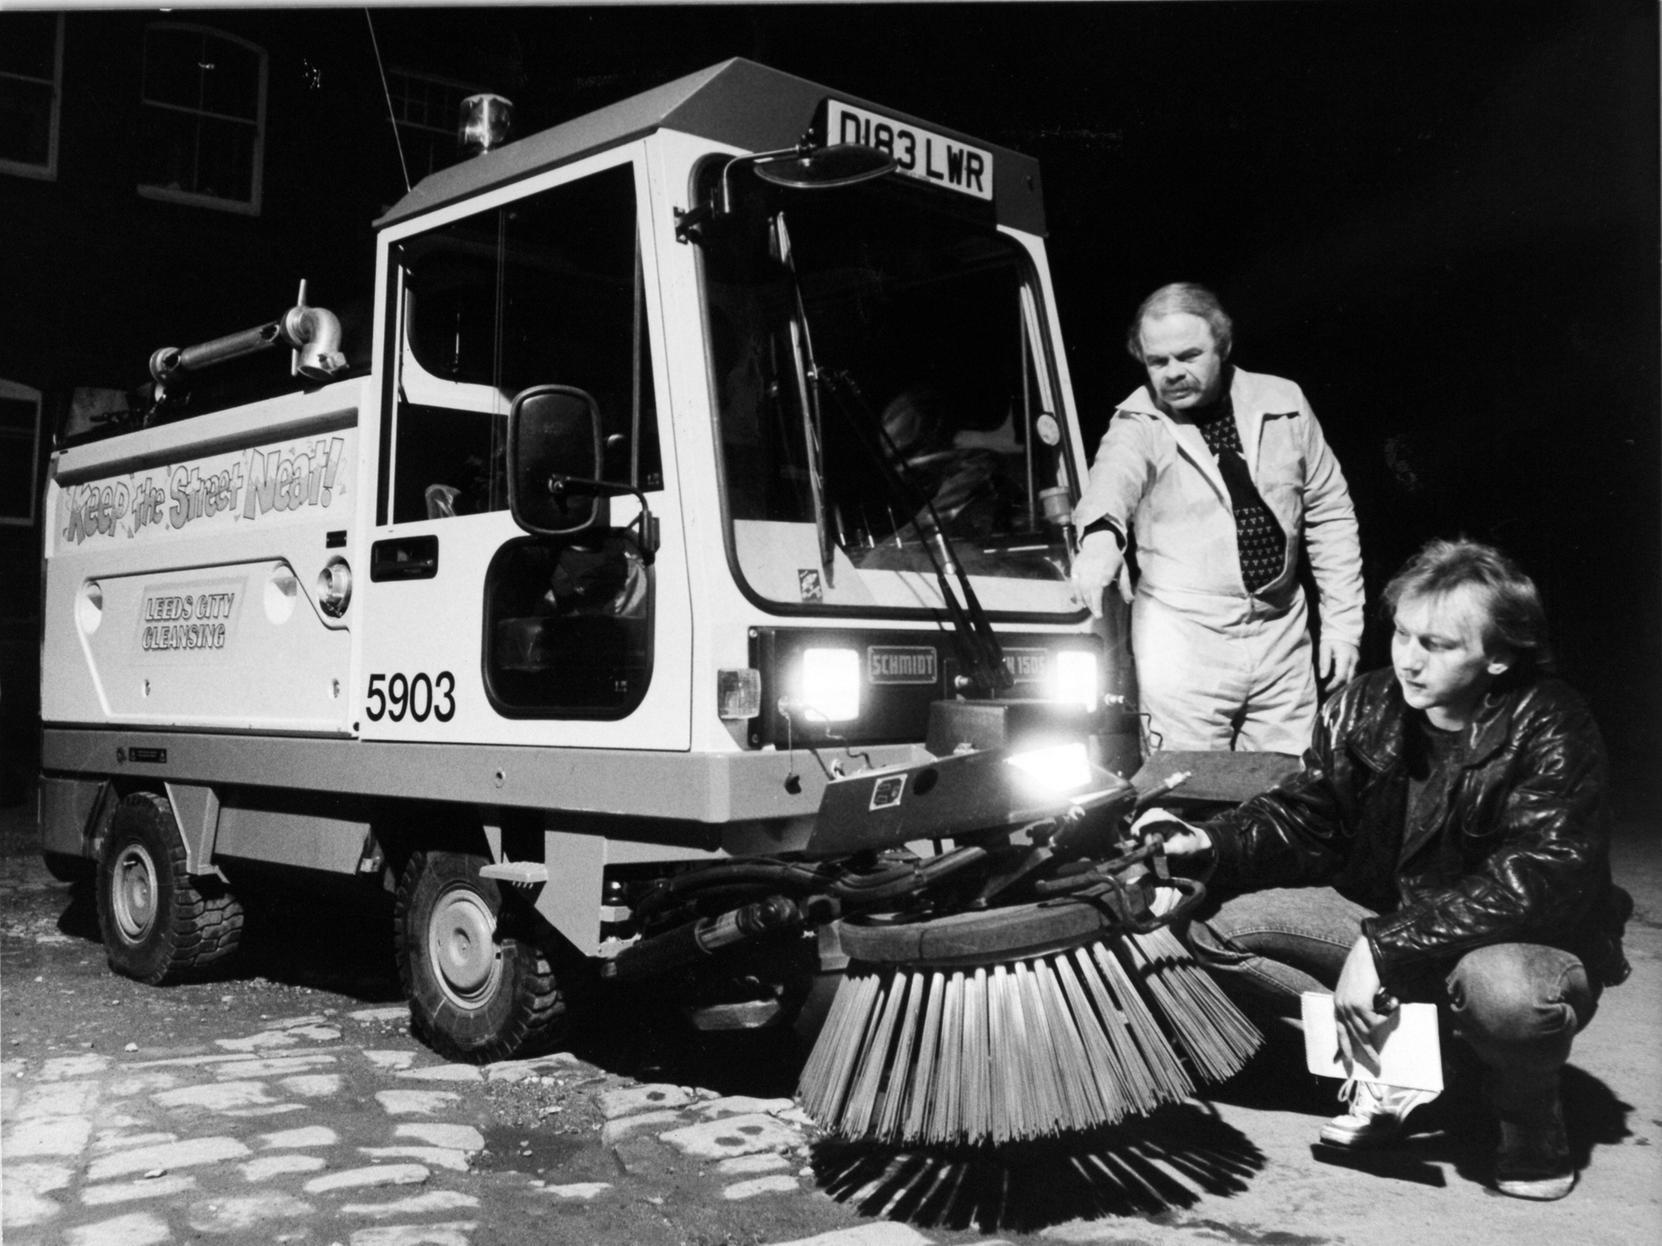 Your YEP joined the roadsweeping night shift in the city centre. This Street King cleaner was one of a fleet of 20 as part of the city's 'Keep the Streets Neat' litter campaign.